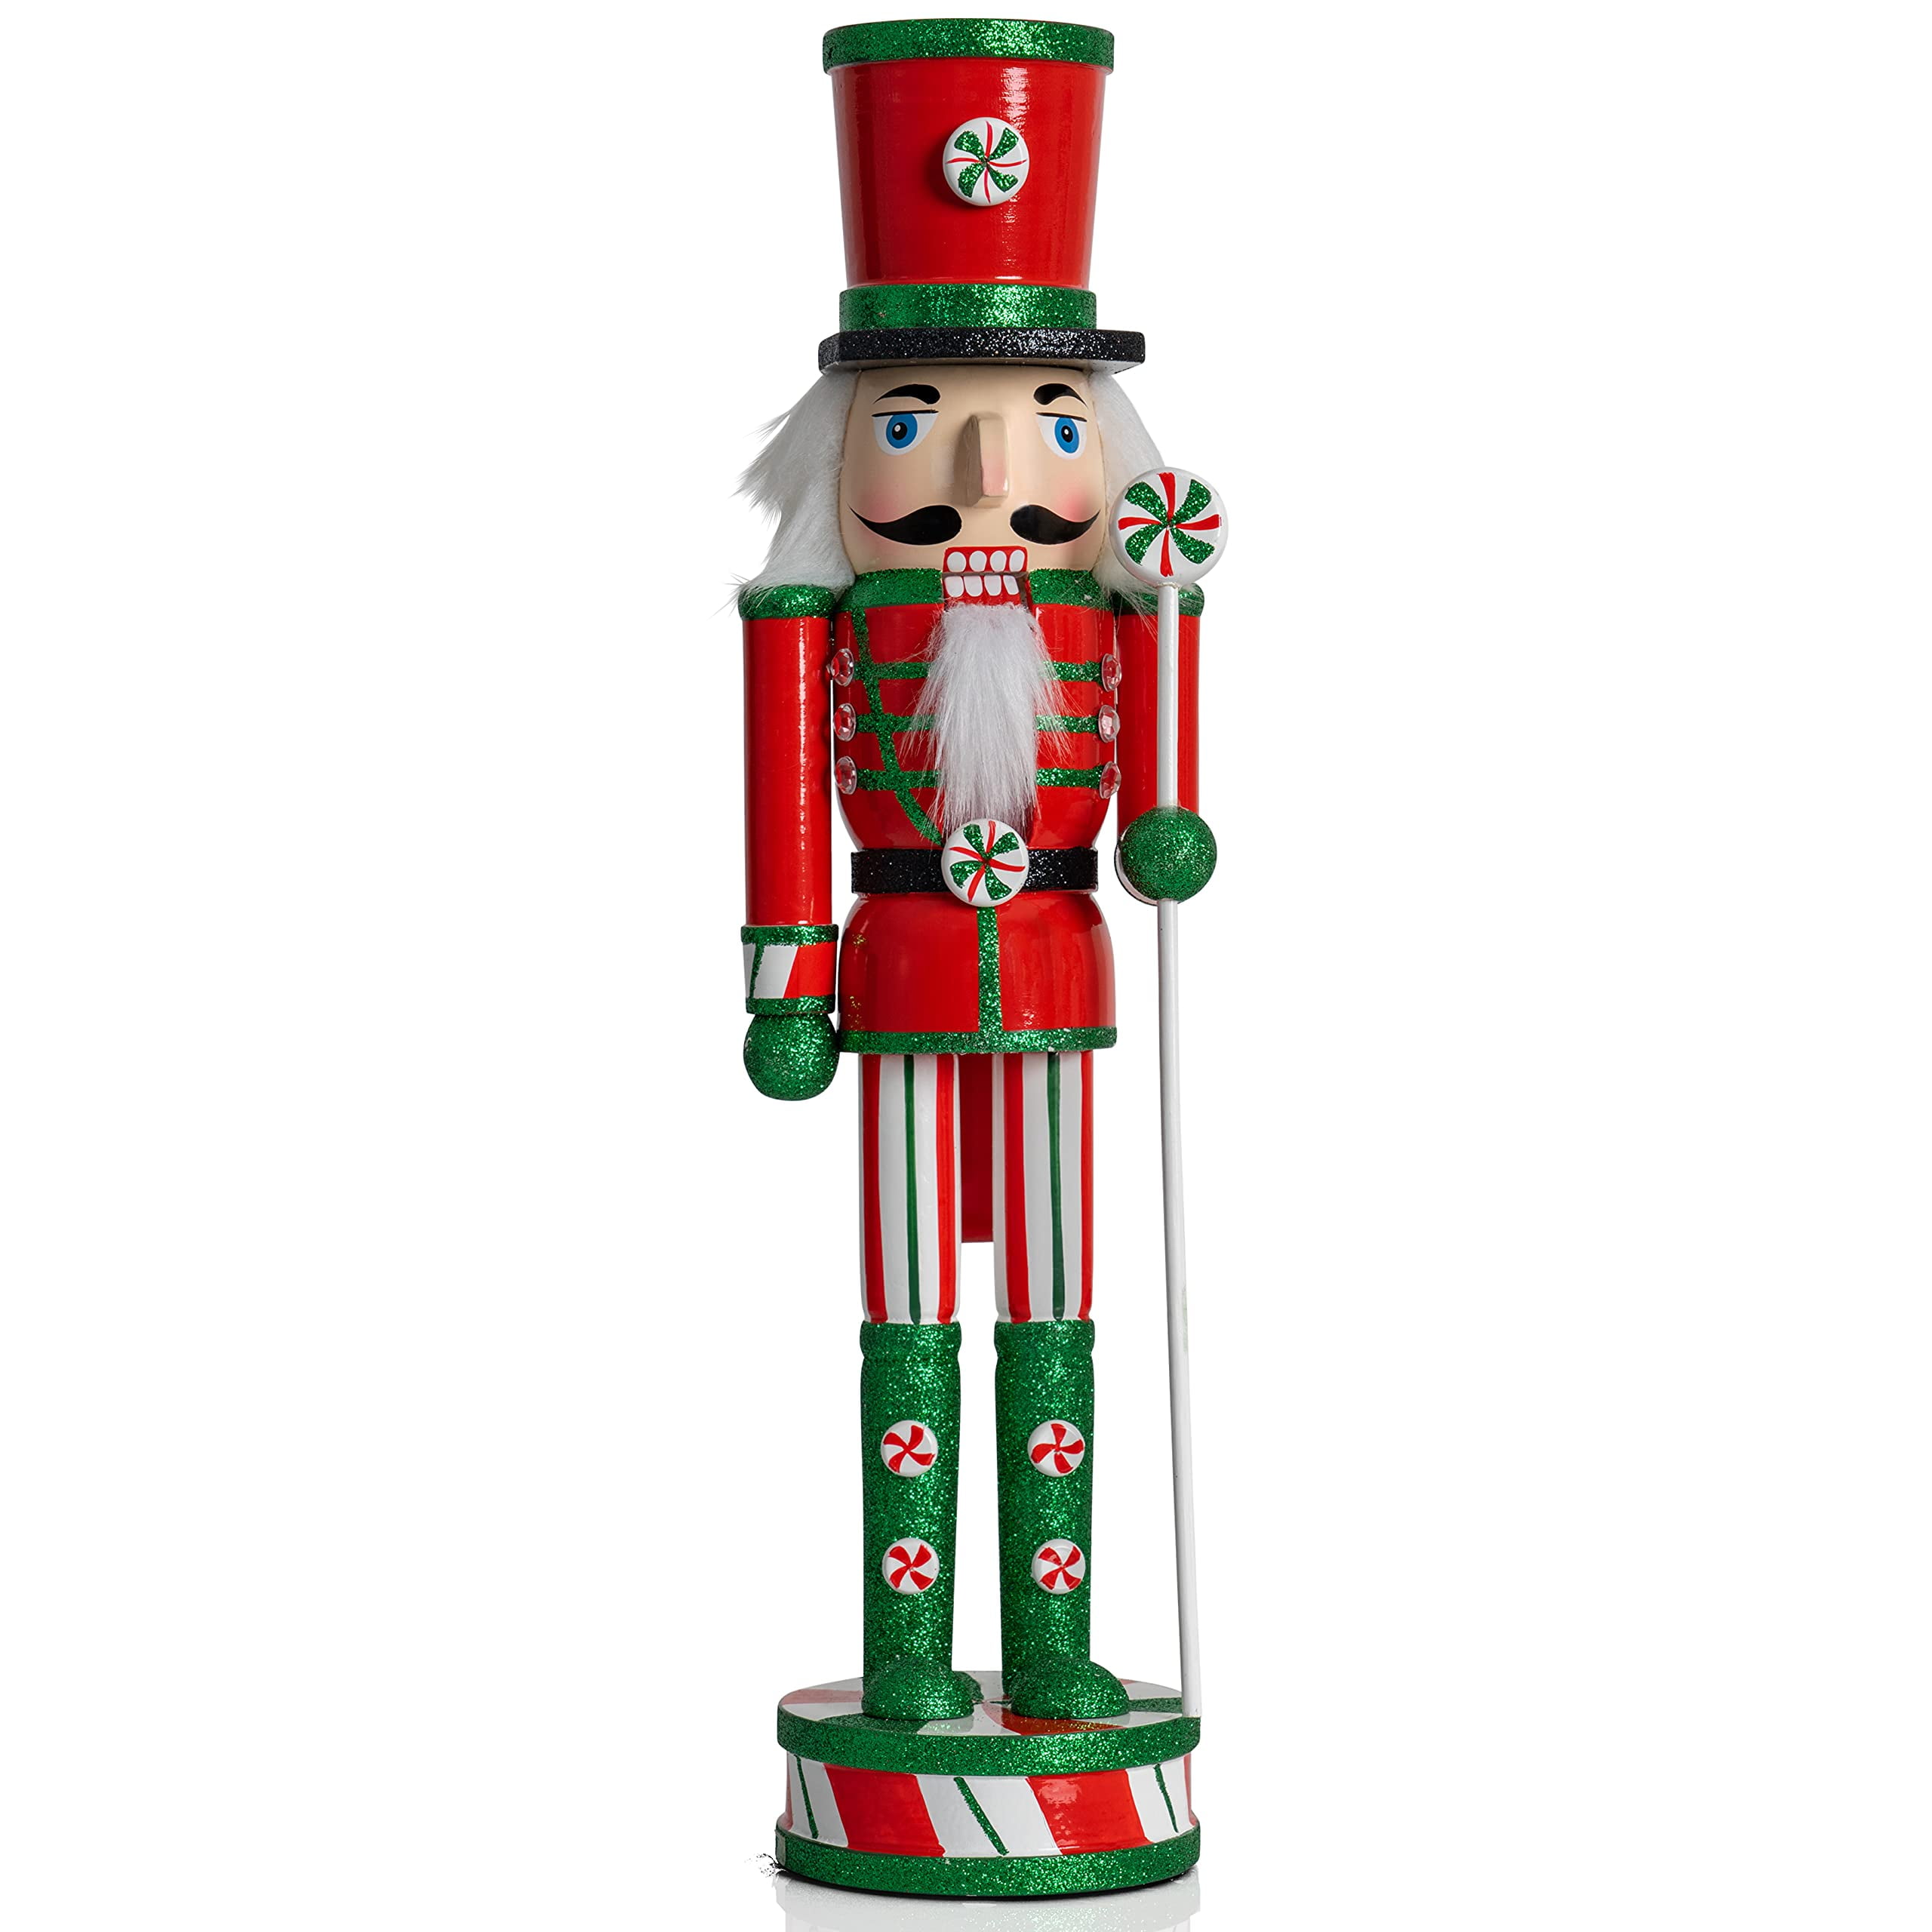 24-40cm Large Wooden Nutcracker Soldier Christmas Xmas Toy Gift Home Decoration 